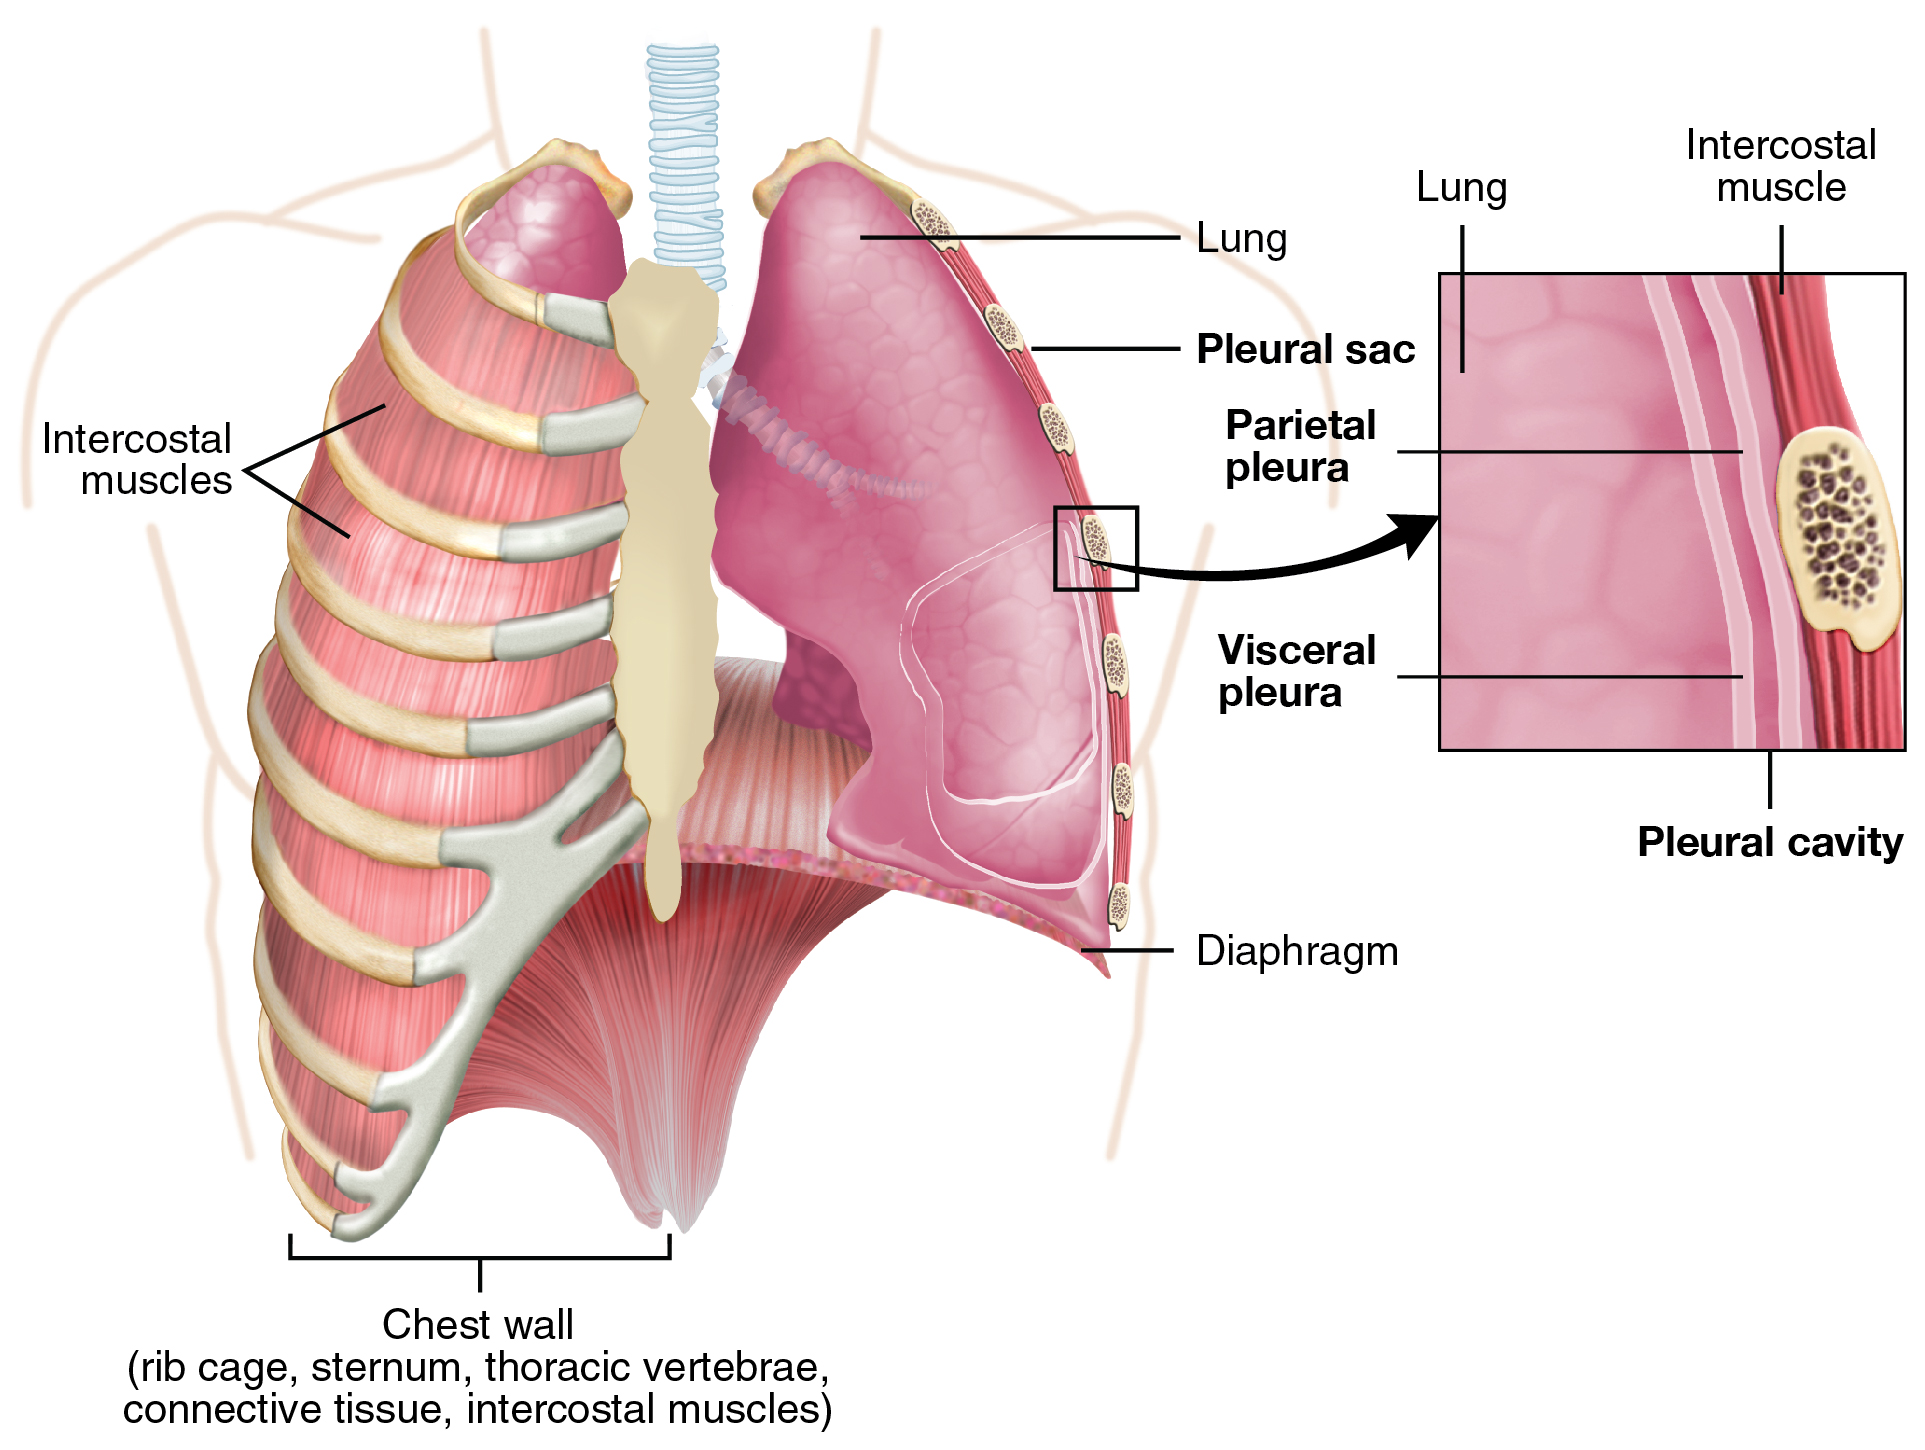 This figure shows the lungs and the chest wall, which protects the lungs, in the left panel. In the right panel, a magnified image shows the pleural cavity and a pleural sac.